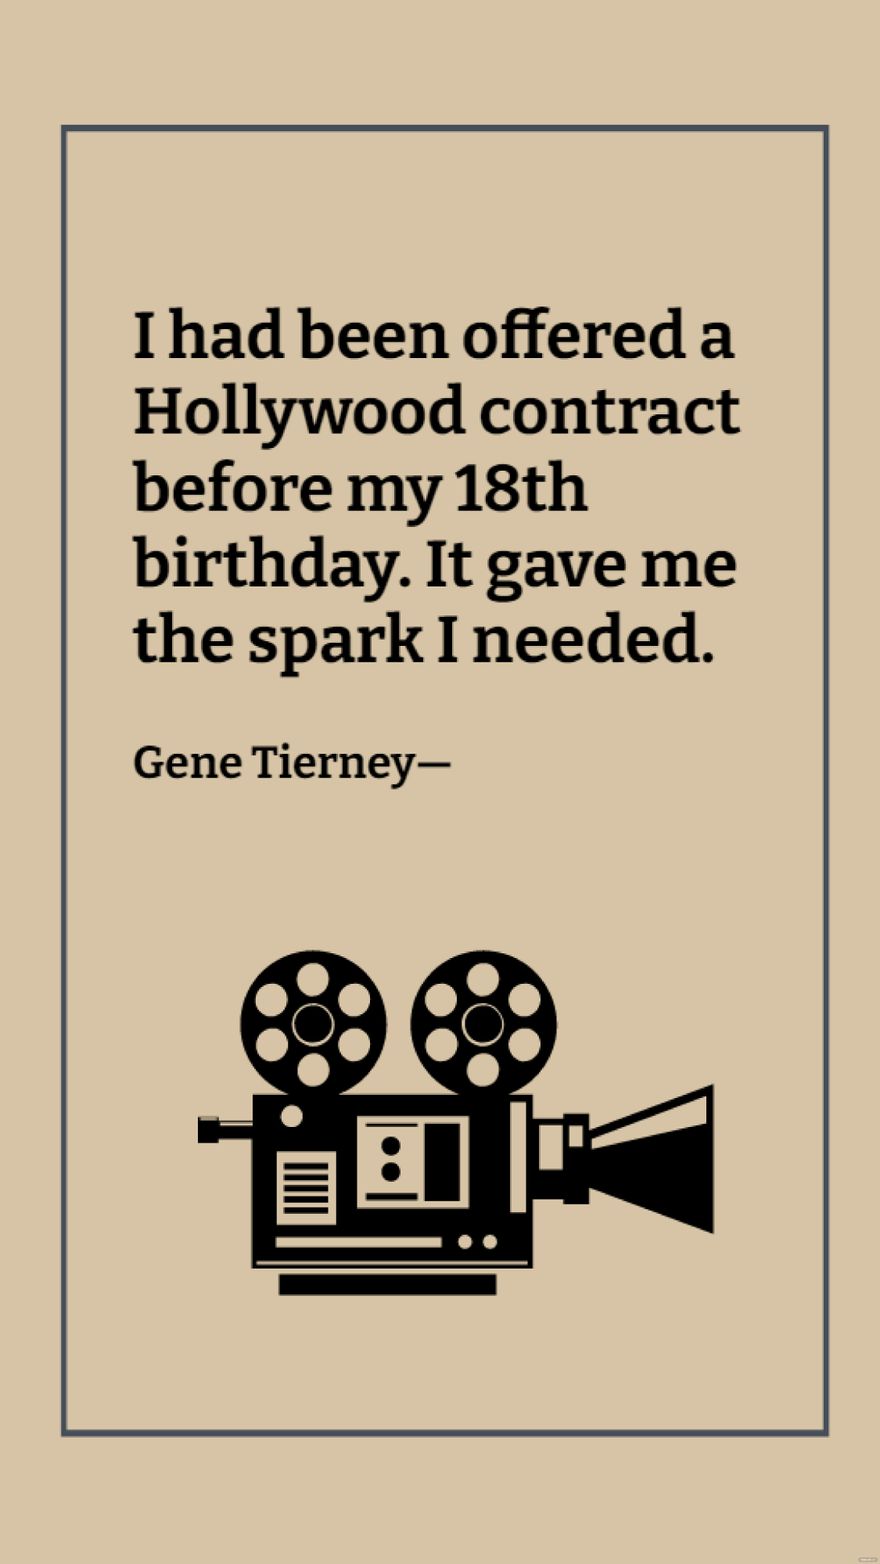 Free Gene Tierney - I had been offered a Hollywood contract before my 18th birthday. It gave me the spark I needed. in JPG